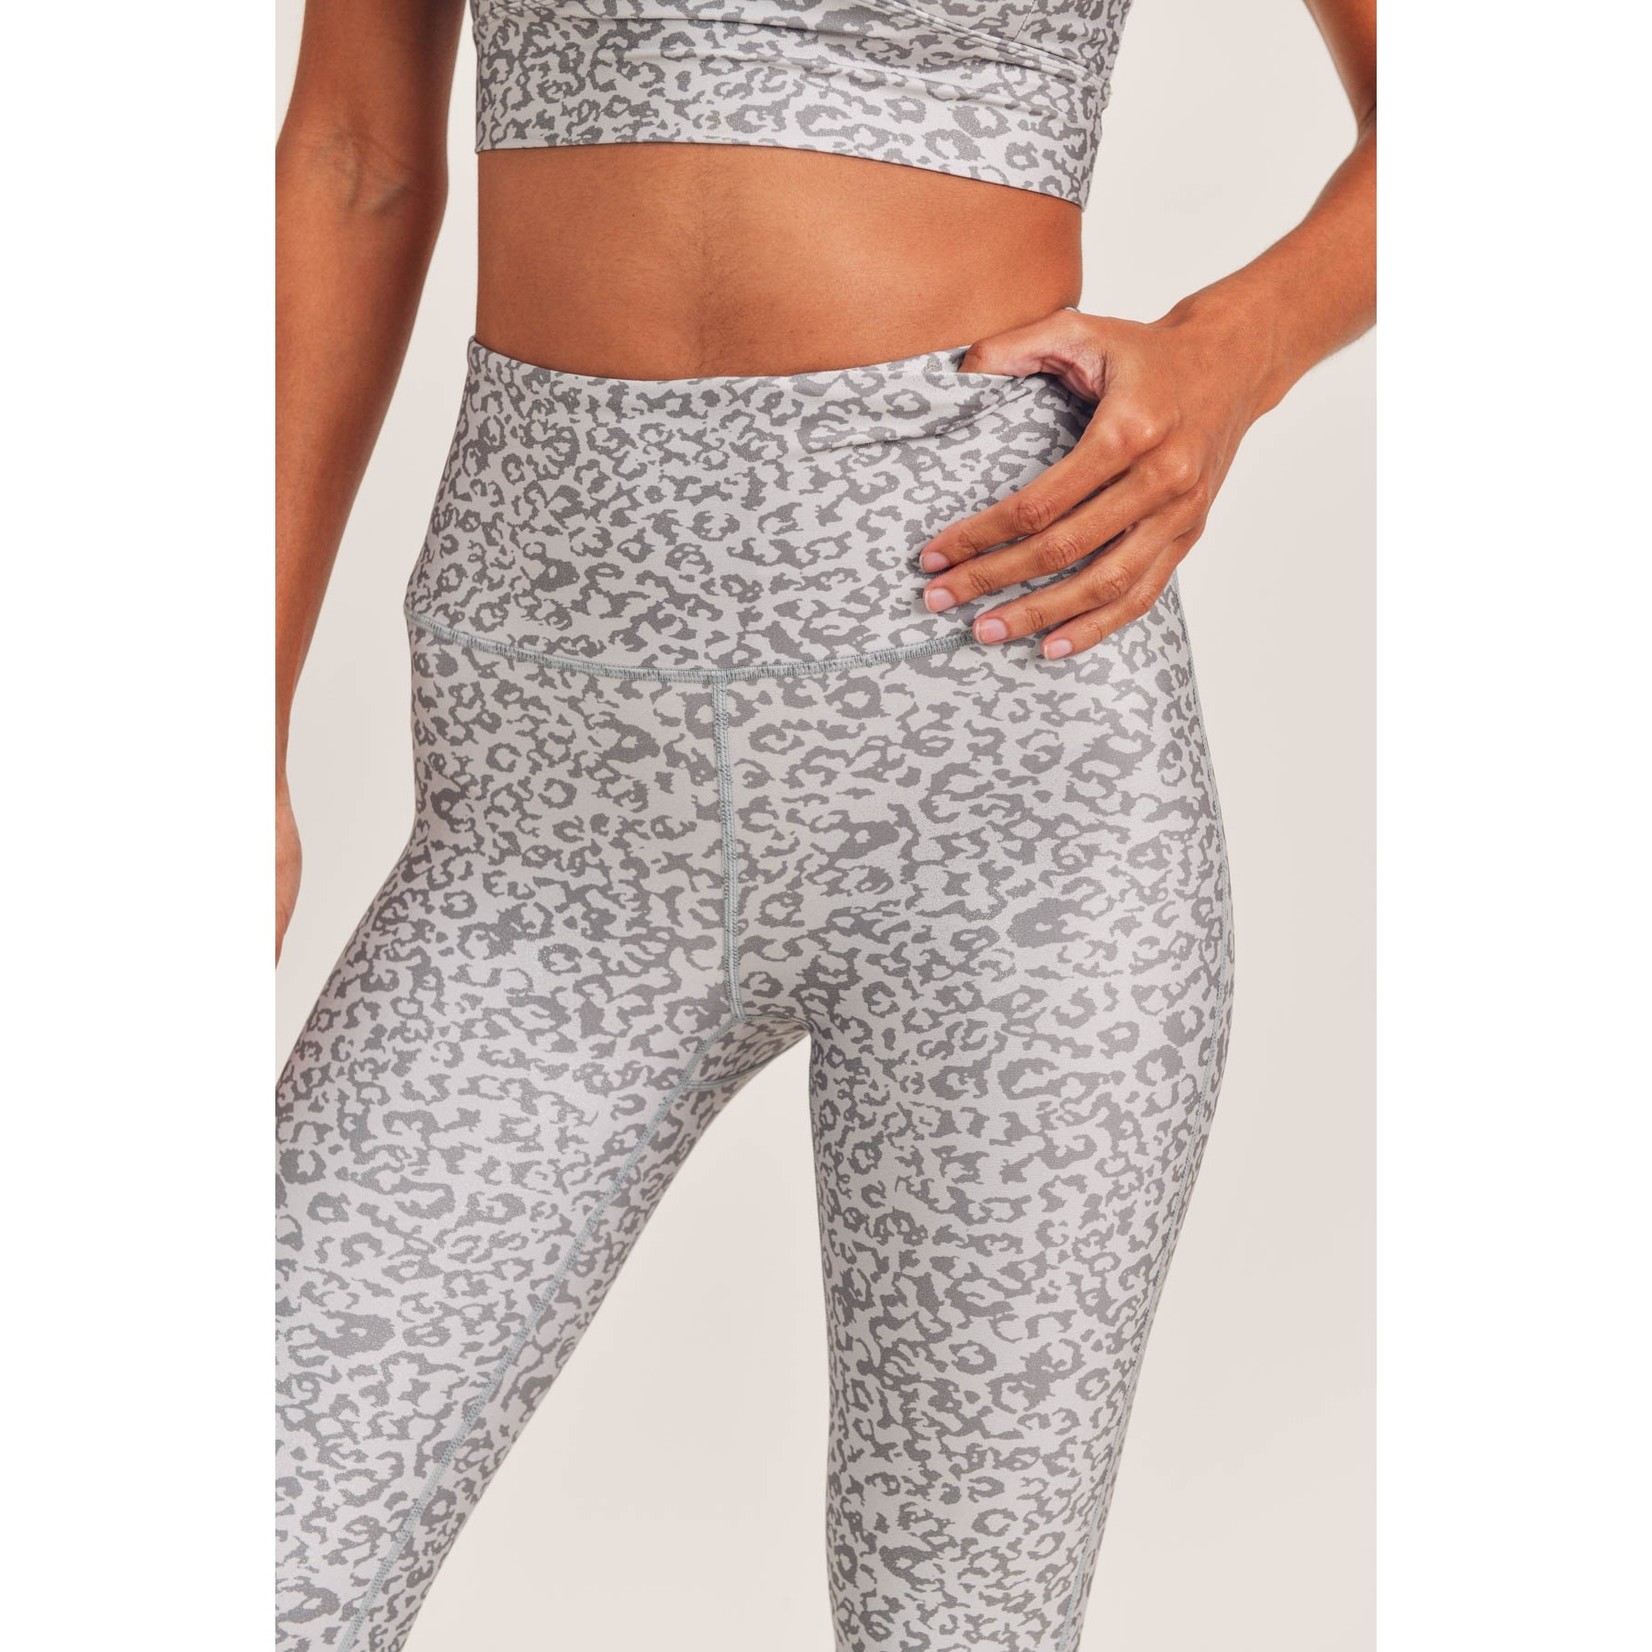 Mindset Is Everything Charcoal Animal Print Leggings FINAL SALE – Pink Lily